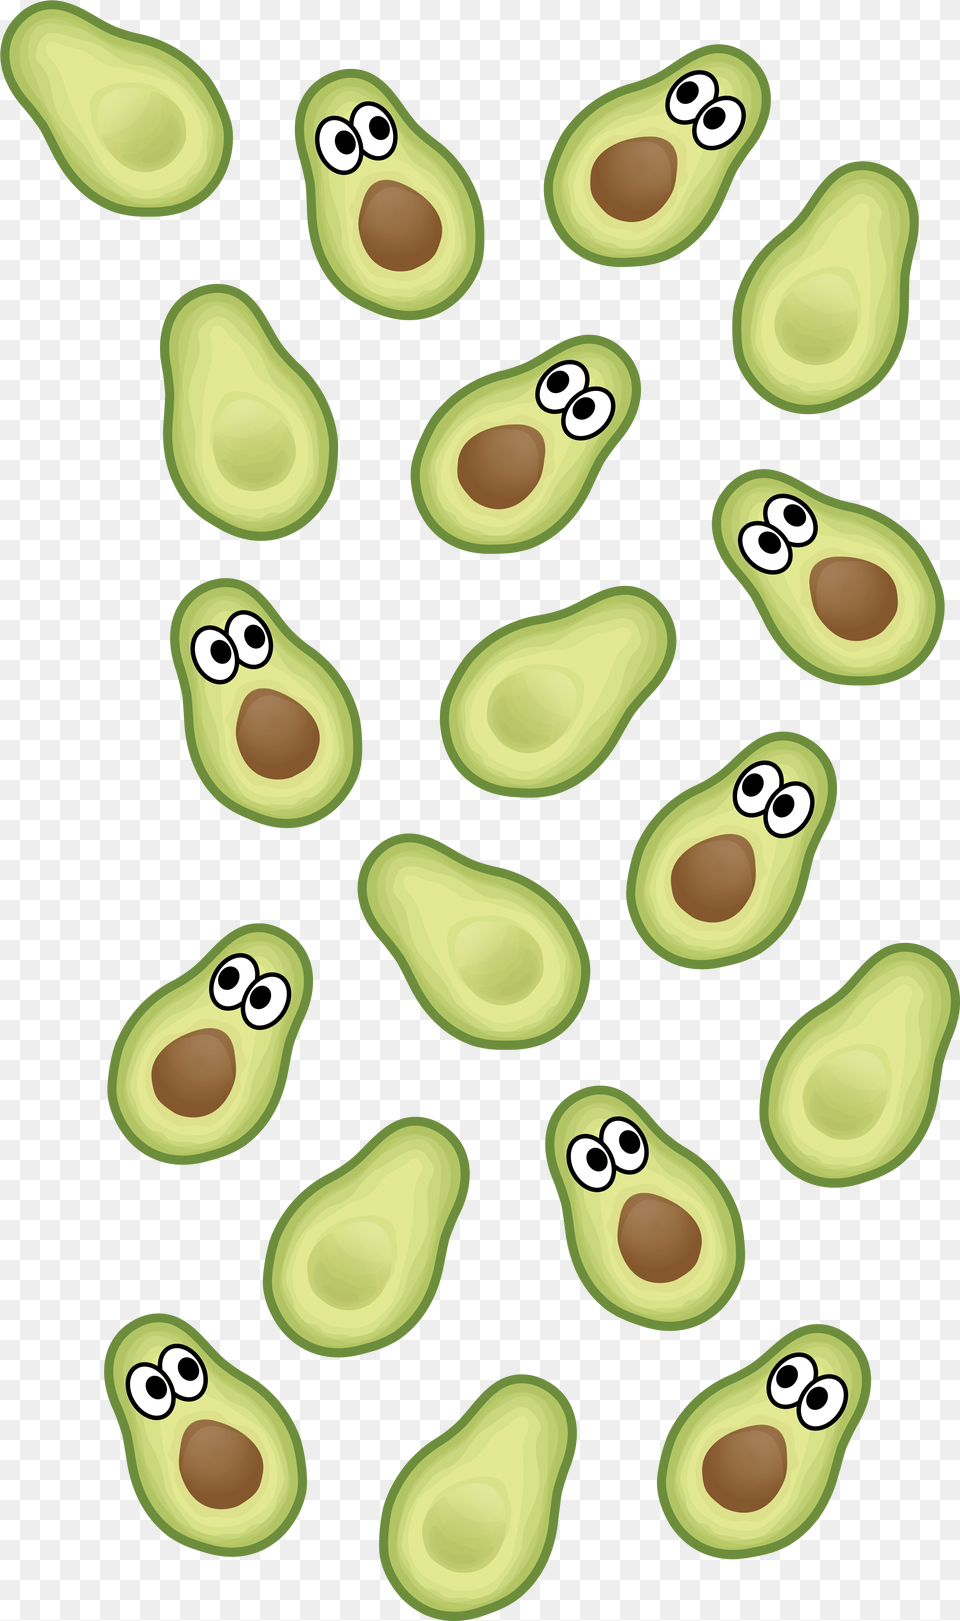 Download Avocado Wallpaper Transparent Cute Backgrounds For Iphones Avocado, Food, Fruit, Plant, Produce Png